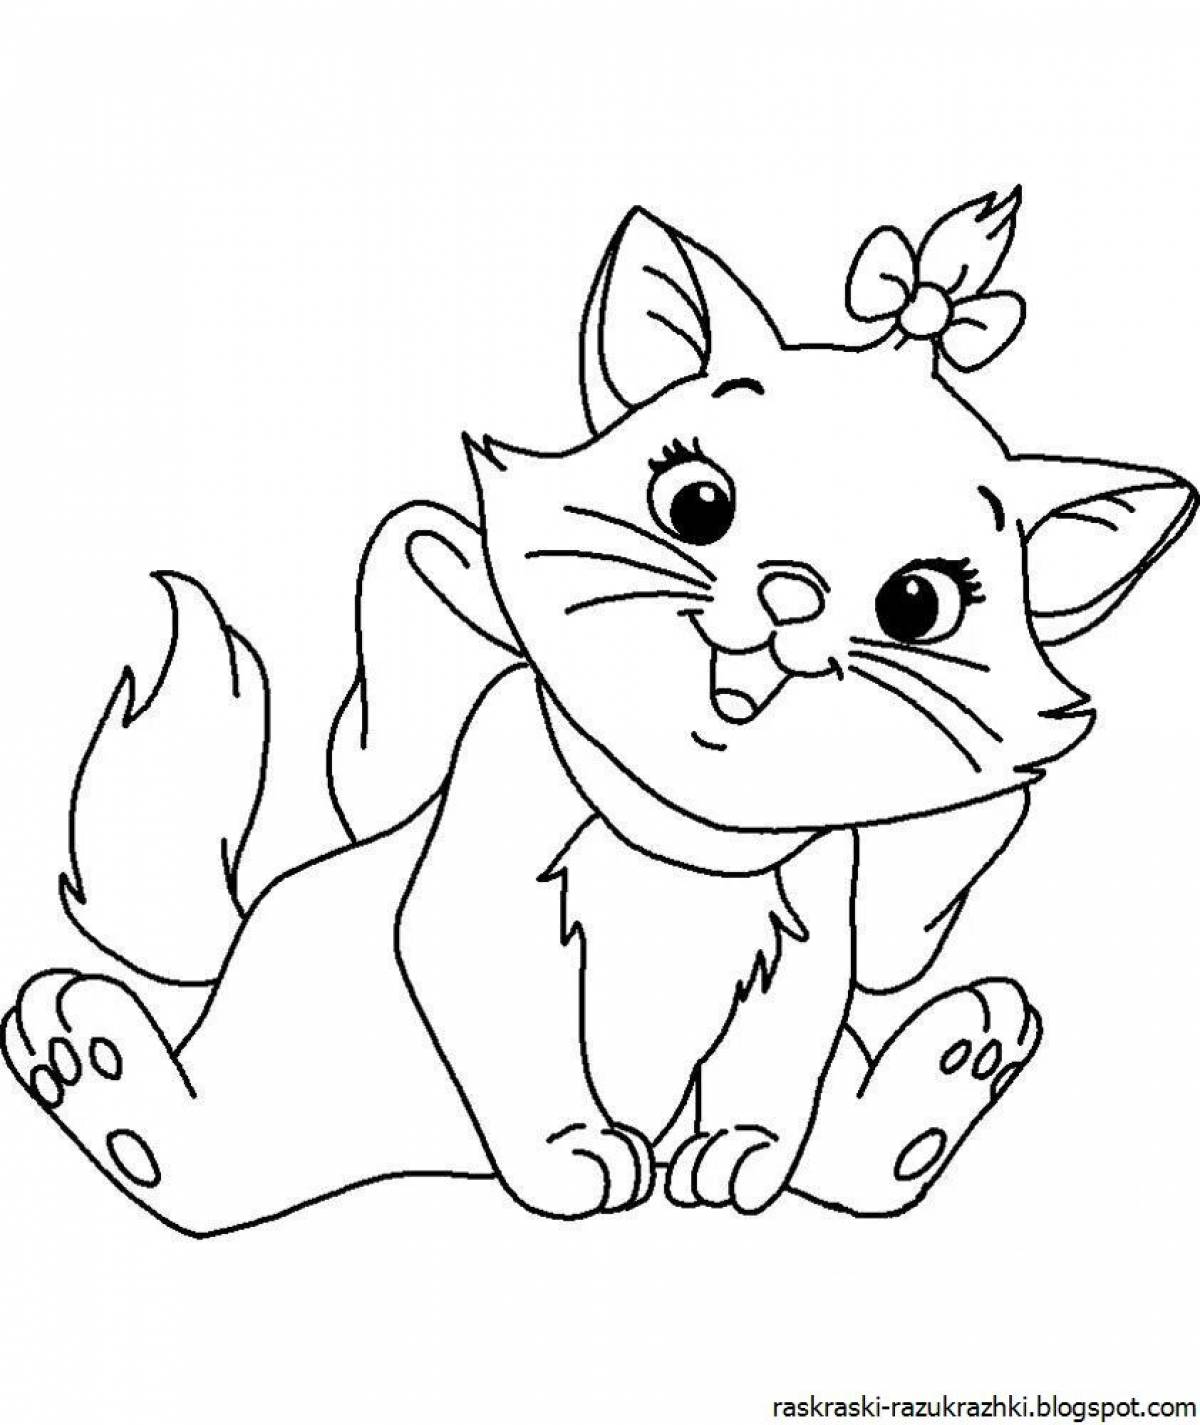 Exciting cat coloring book for kids